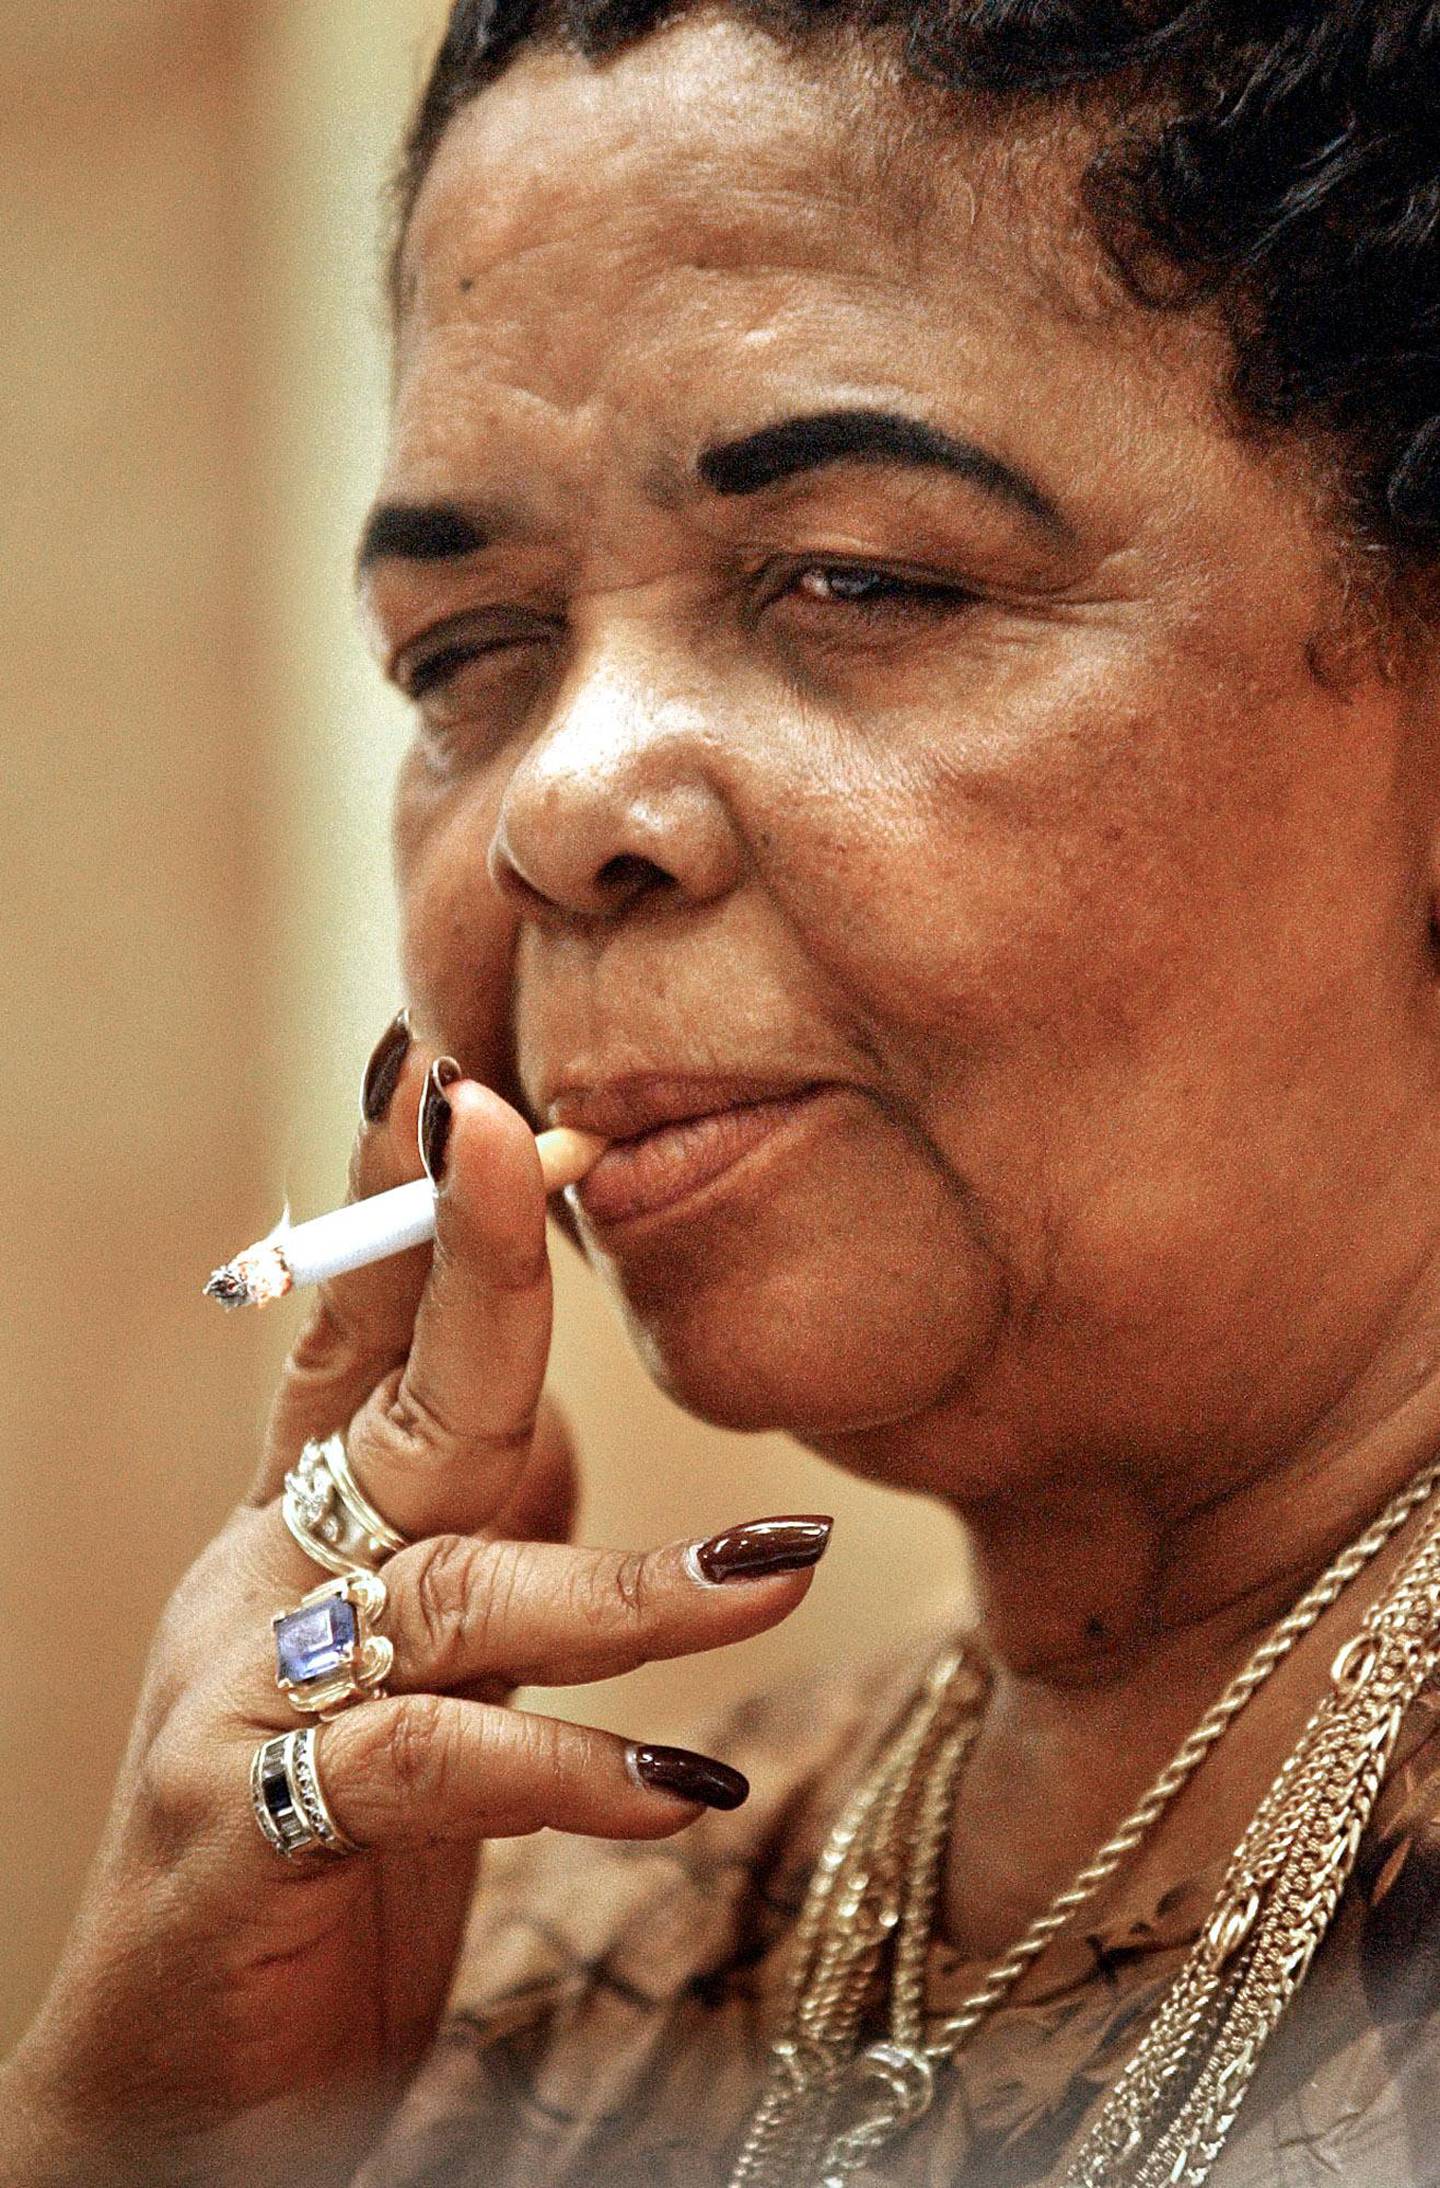 Cesaria Evora, Grammy winning singer from Cape Verde, smokes a cigarette while speaking to Romanian journalists during a  press conference in Bucharest, Romania, Tuesday June 29, 2004. Evora will present her new album in a live performance Tuesday night. (AP Photo/Vadim Ghirda)